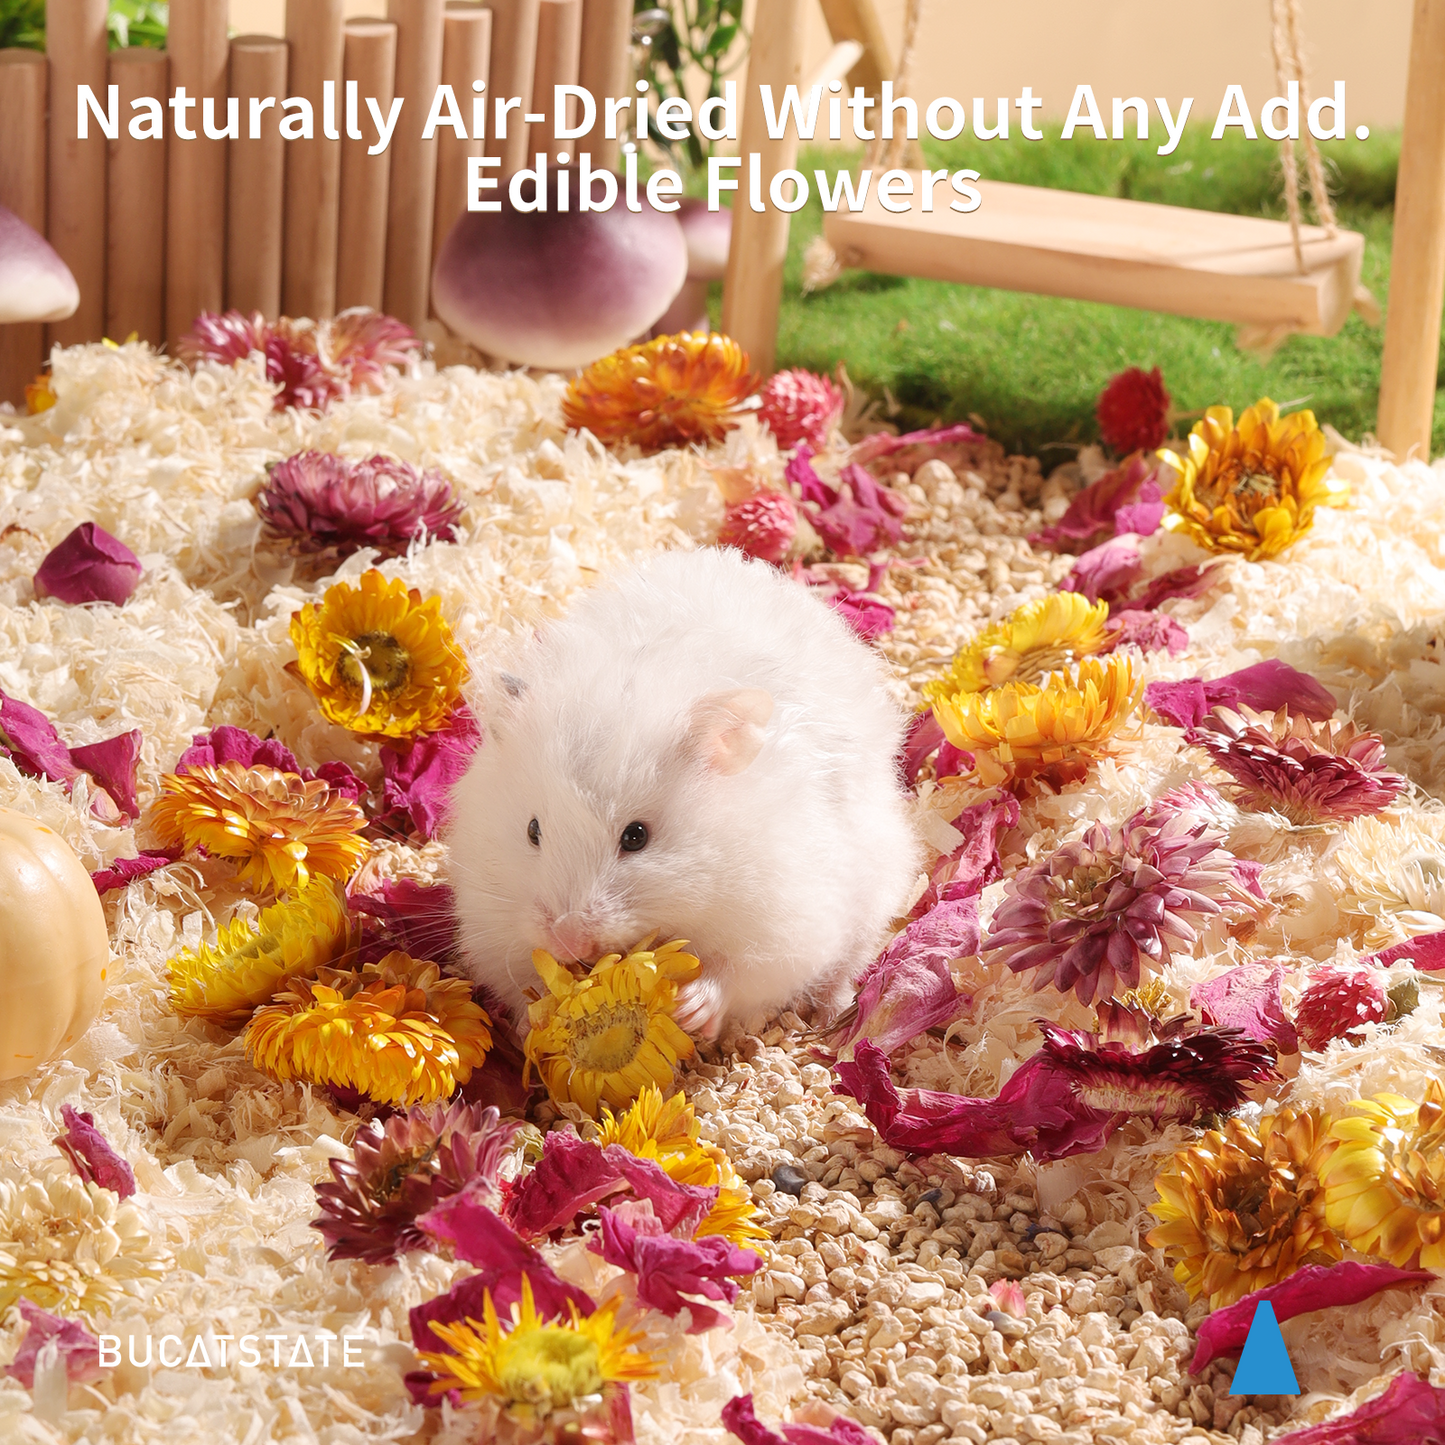 BUCATSTATE Flowers Scent Natural & Soft Hamster Bedding-200g/7oz (Pure Flowers)